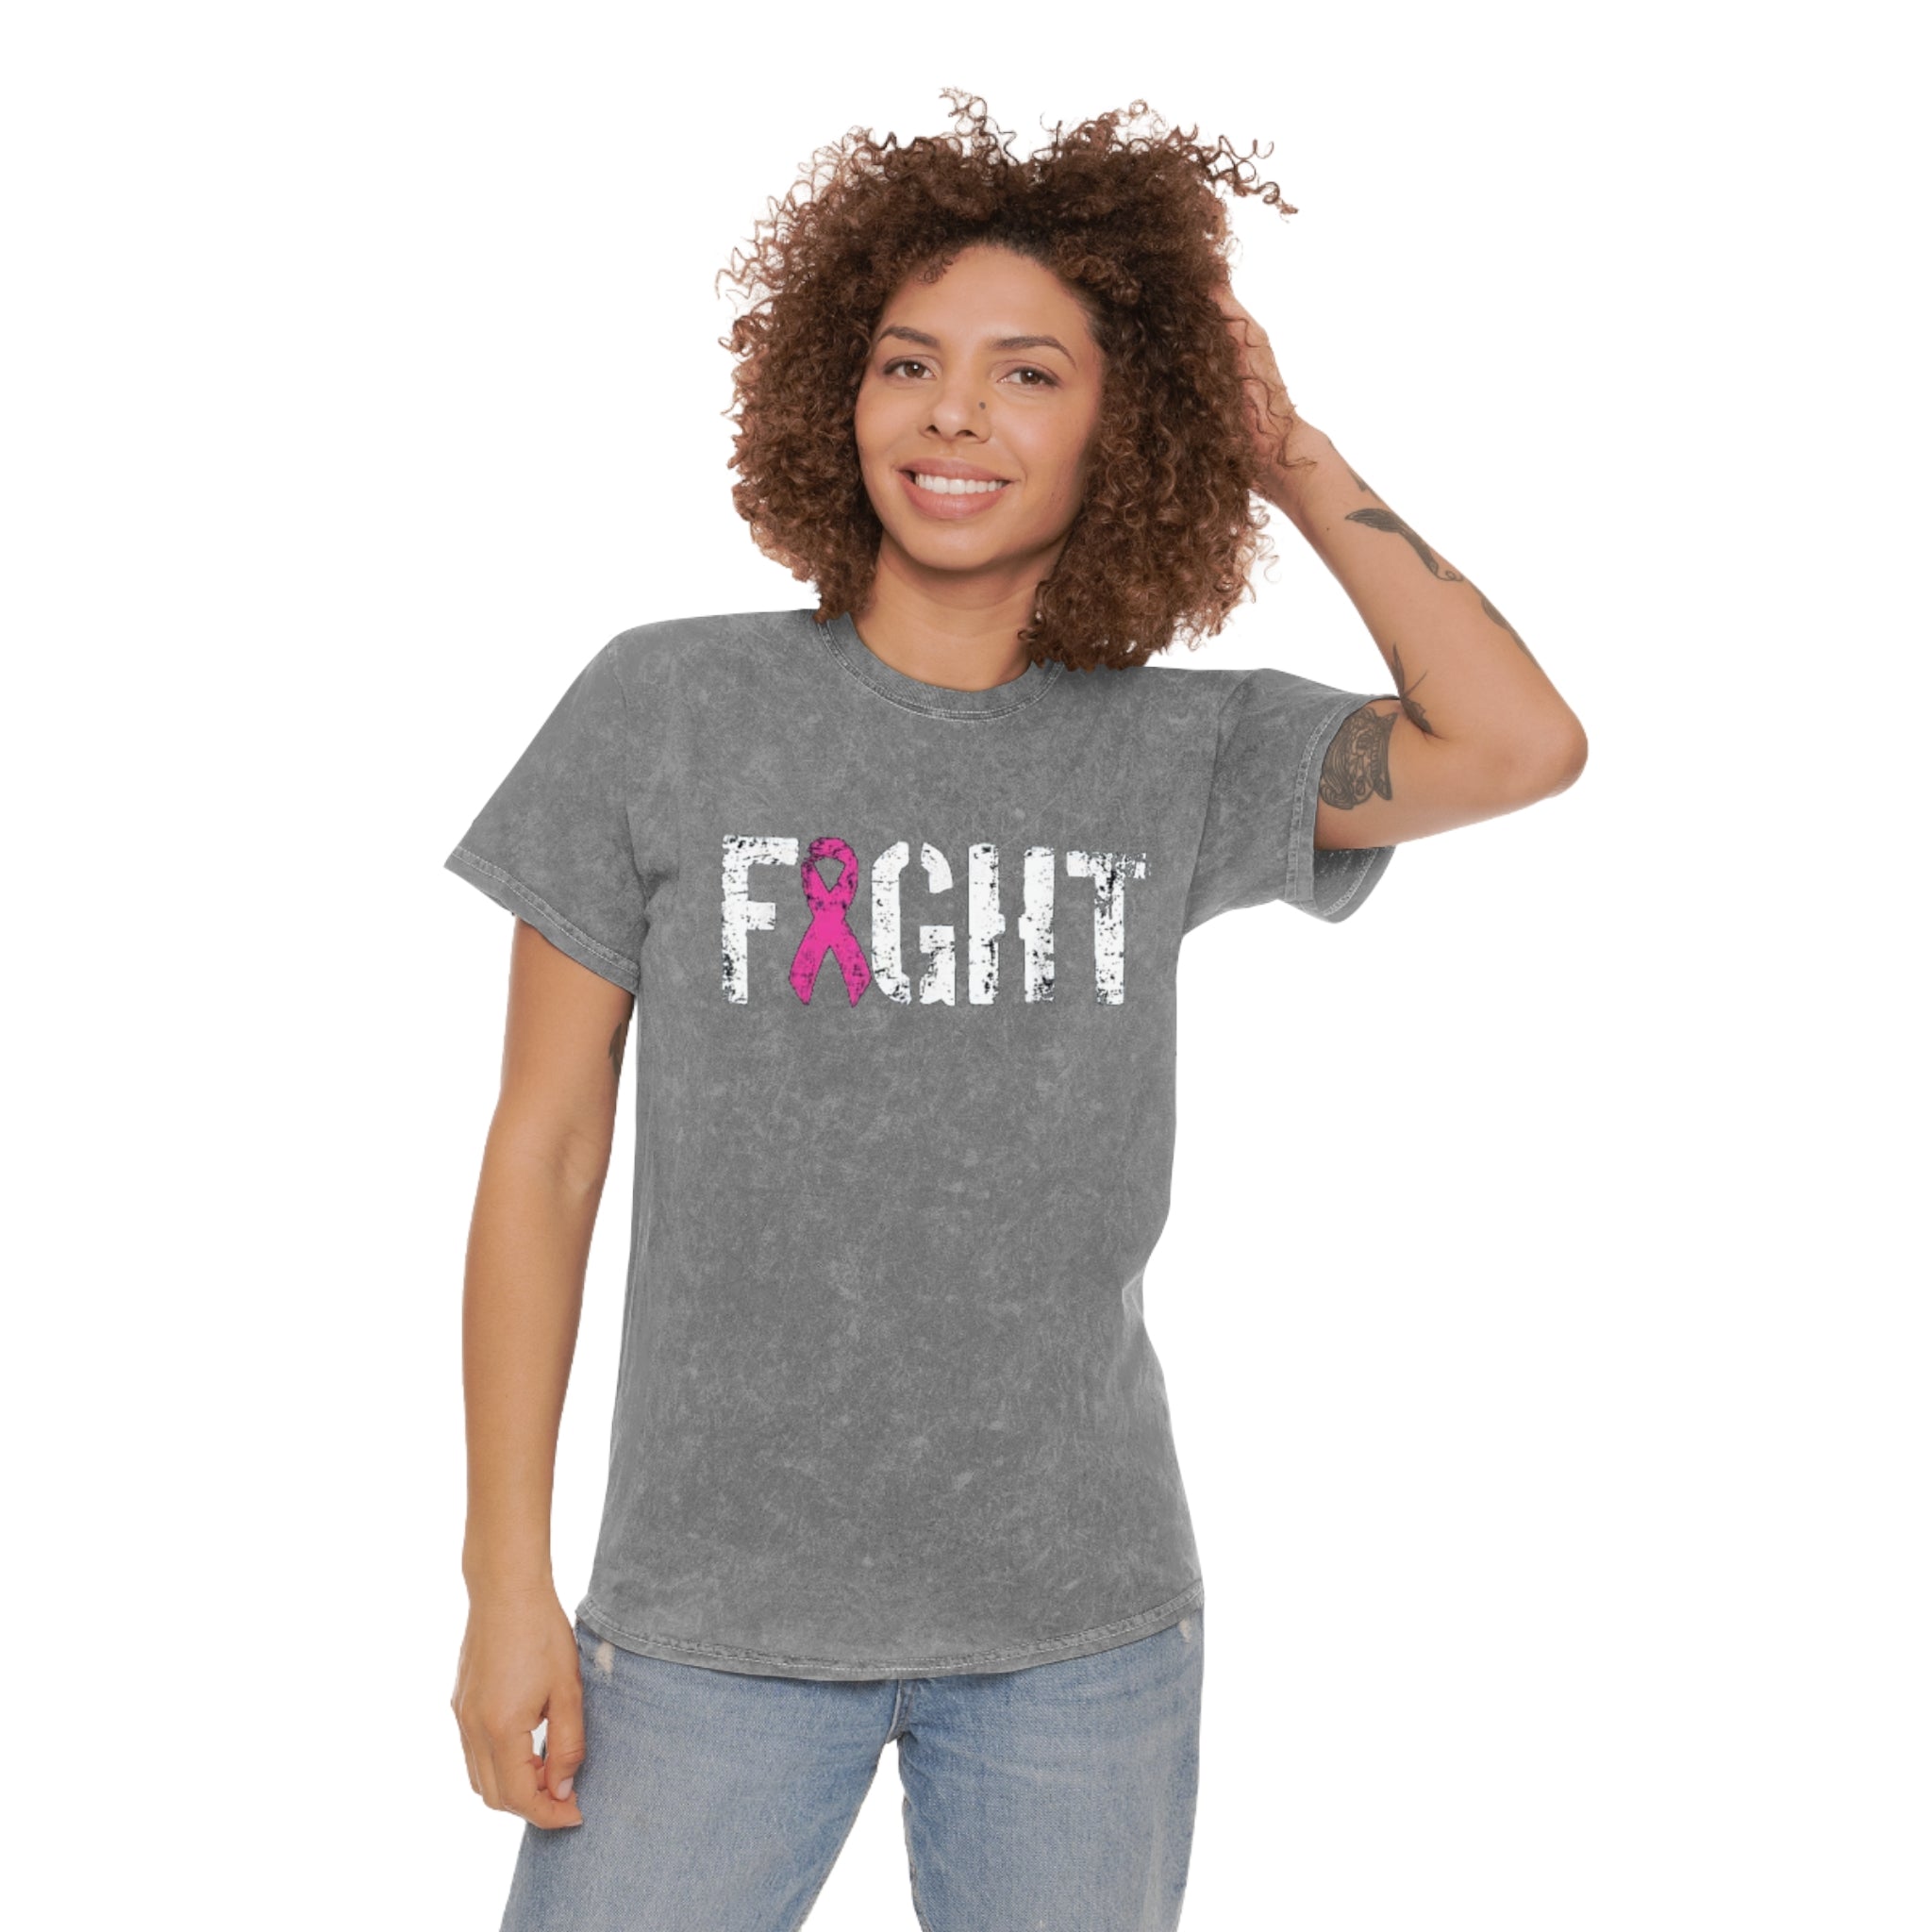 Unisex Mineral Wash T-Shirt - "Fight" Breast Cancer Awareness